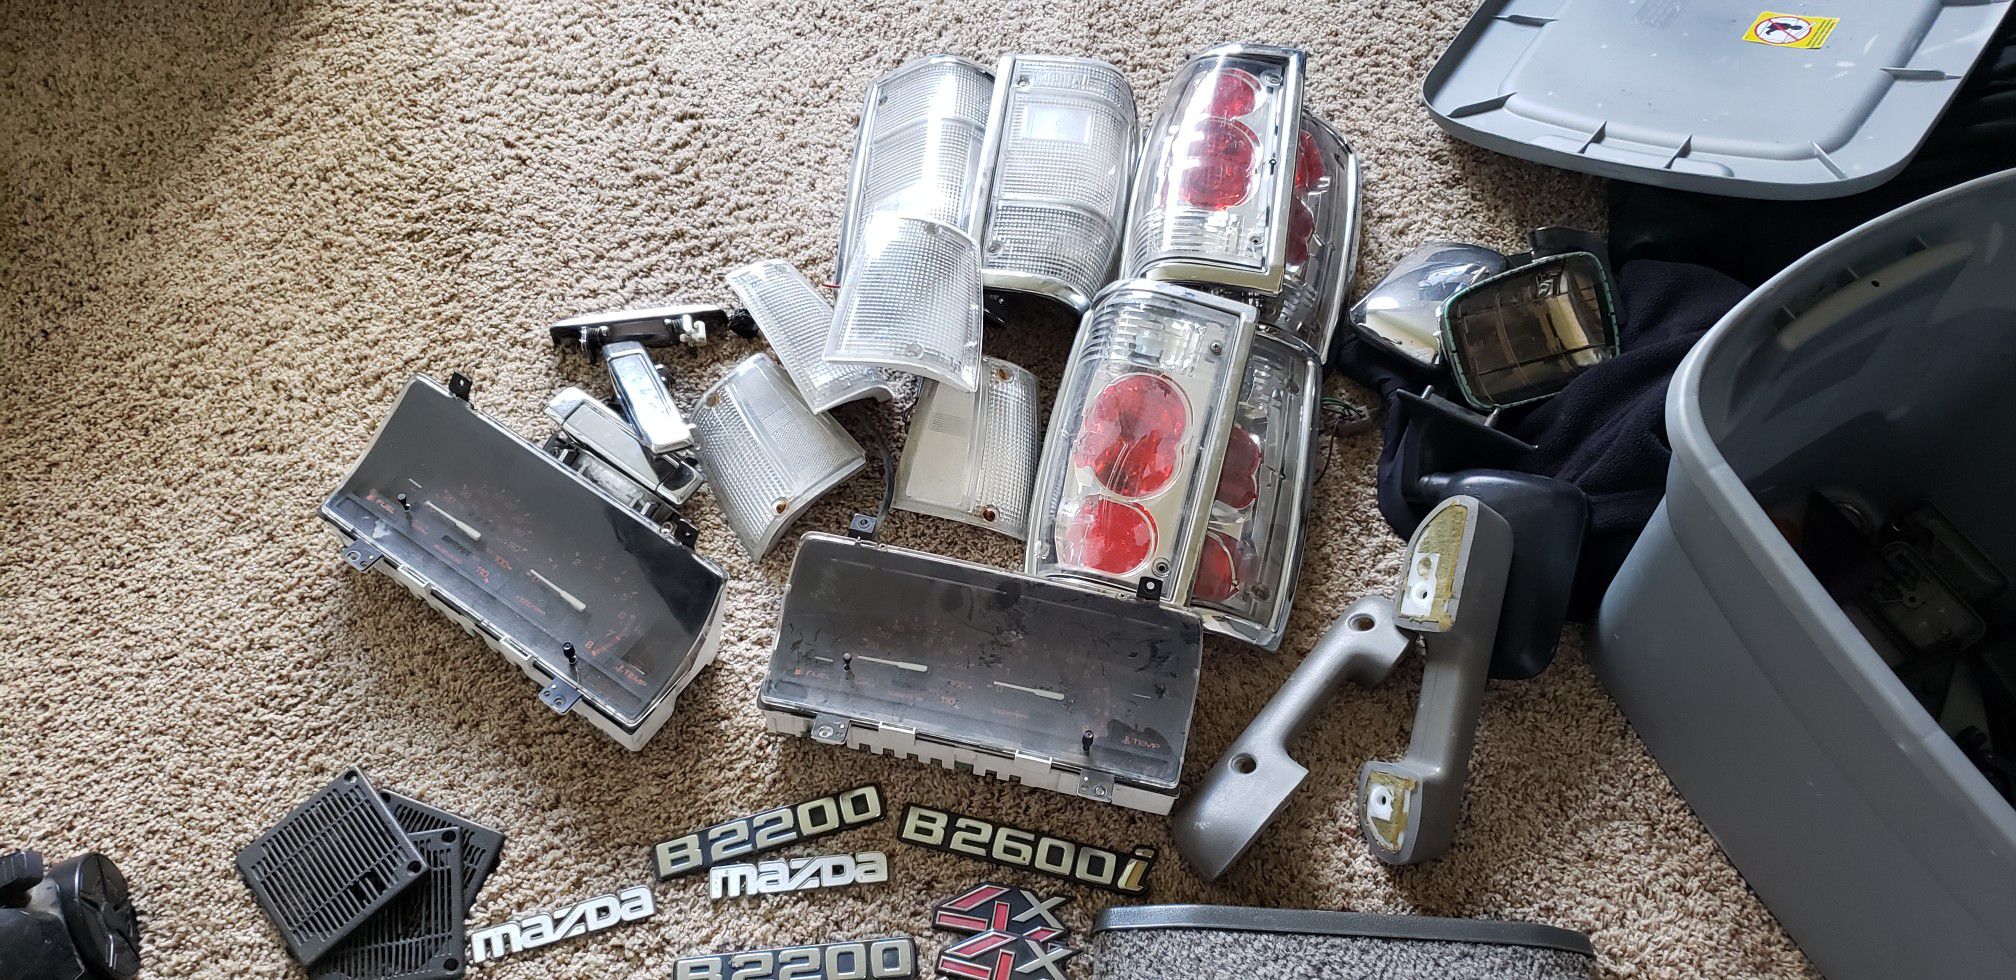 Mazda b series parts parts are pictured clear tailights are sold..